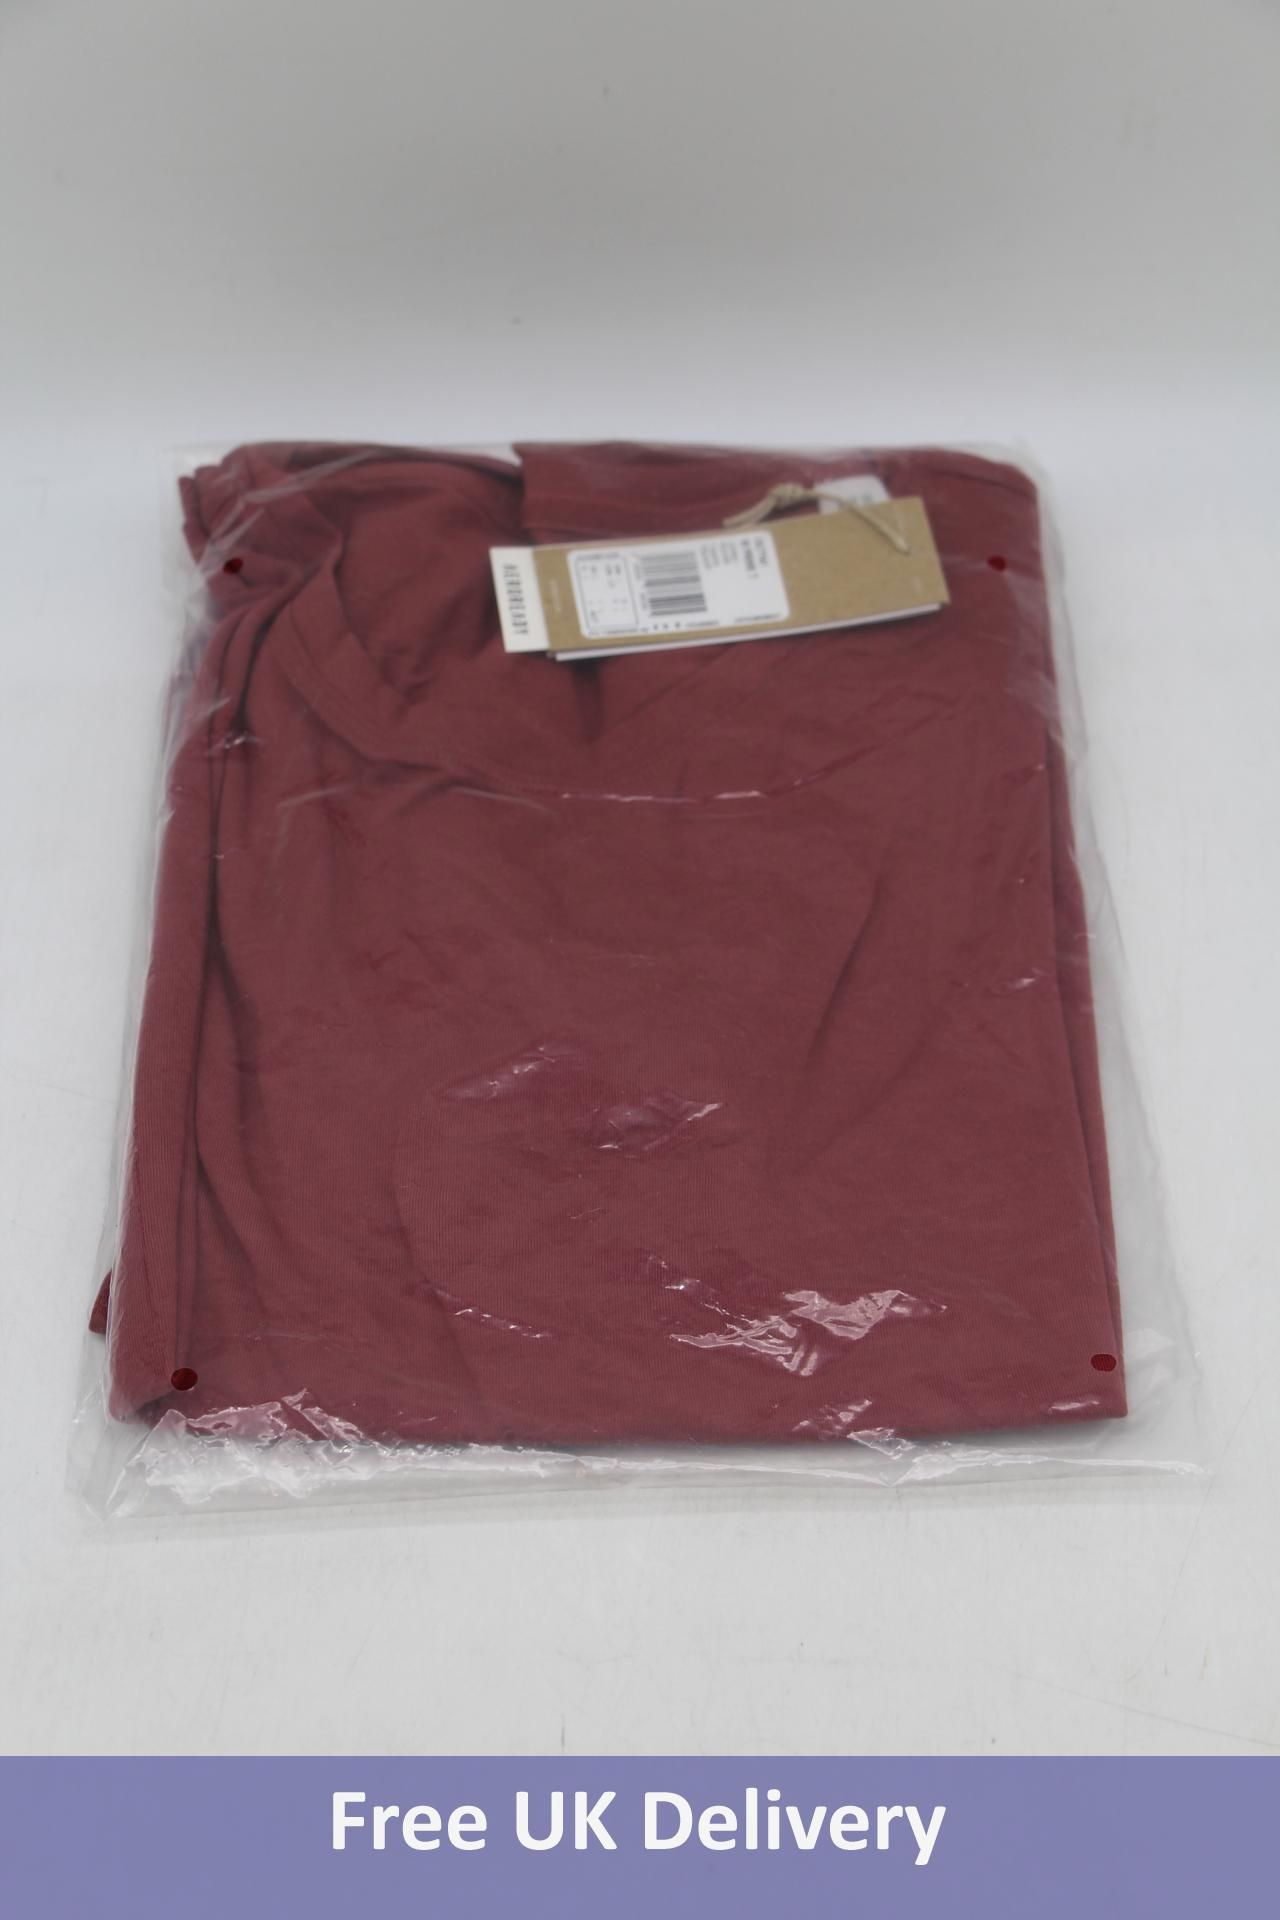 Three Adidas Women's Prime T-shirts to include 2x Large and 1x XL, Burgundy